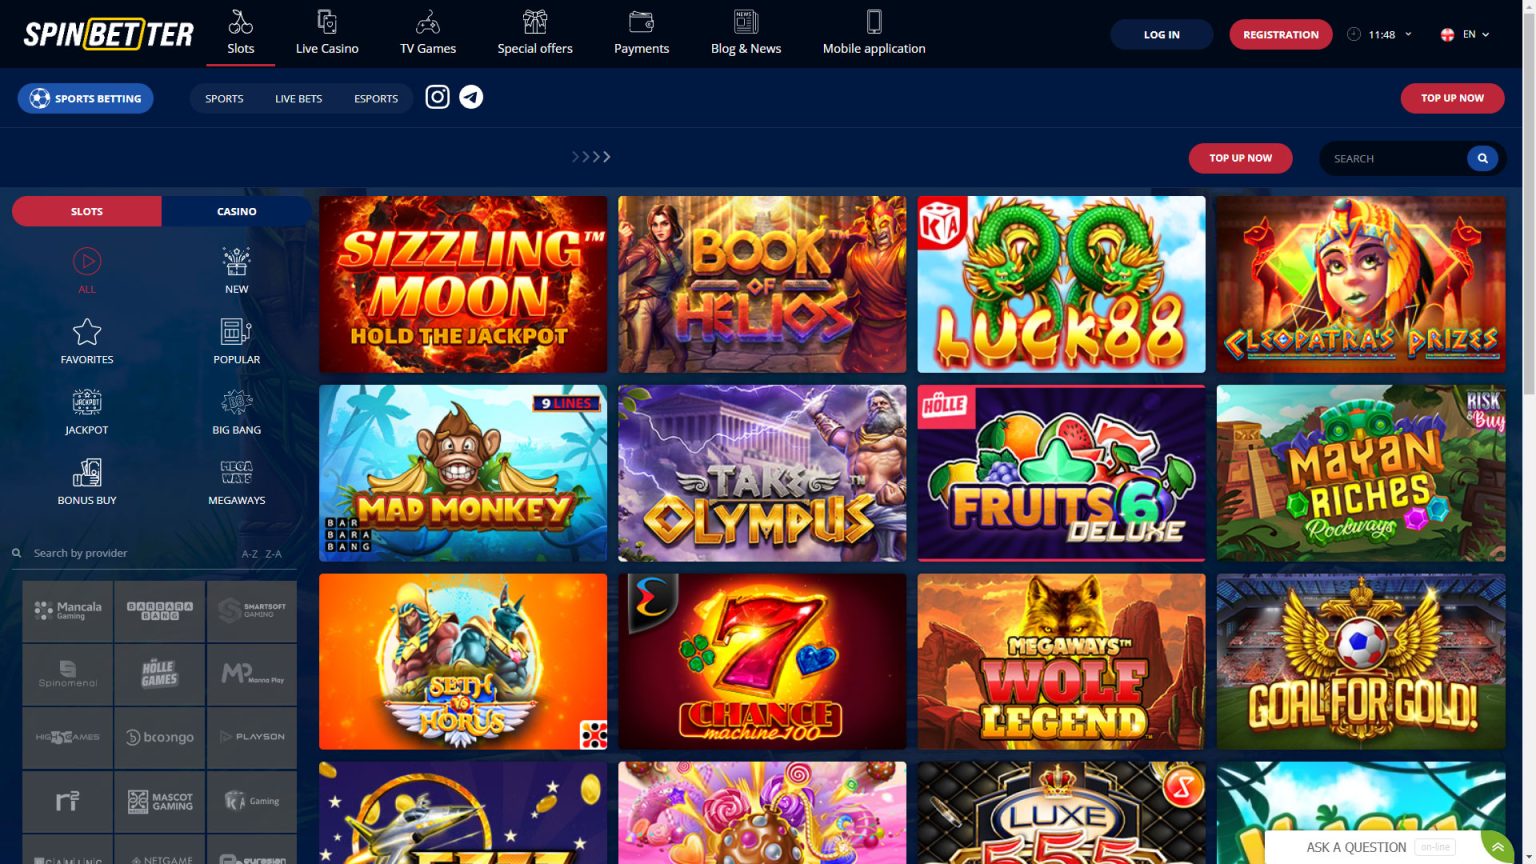 Spinbetter Casino Review – Deposit from $/€1 and get a Bonus